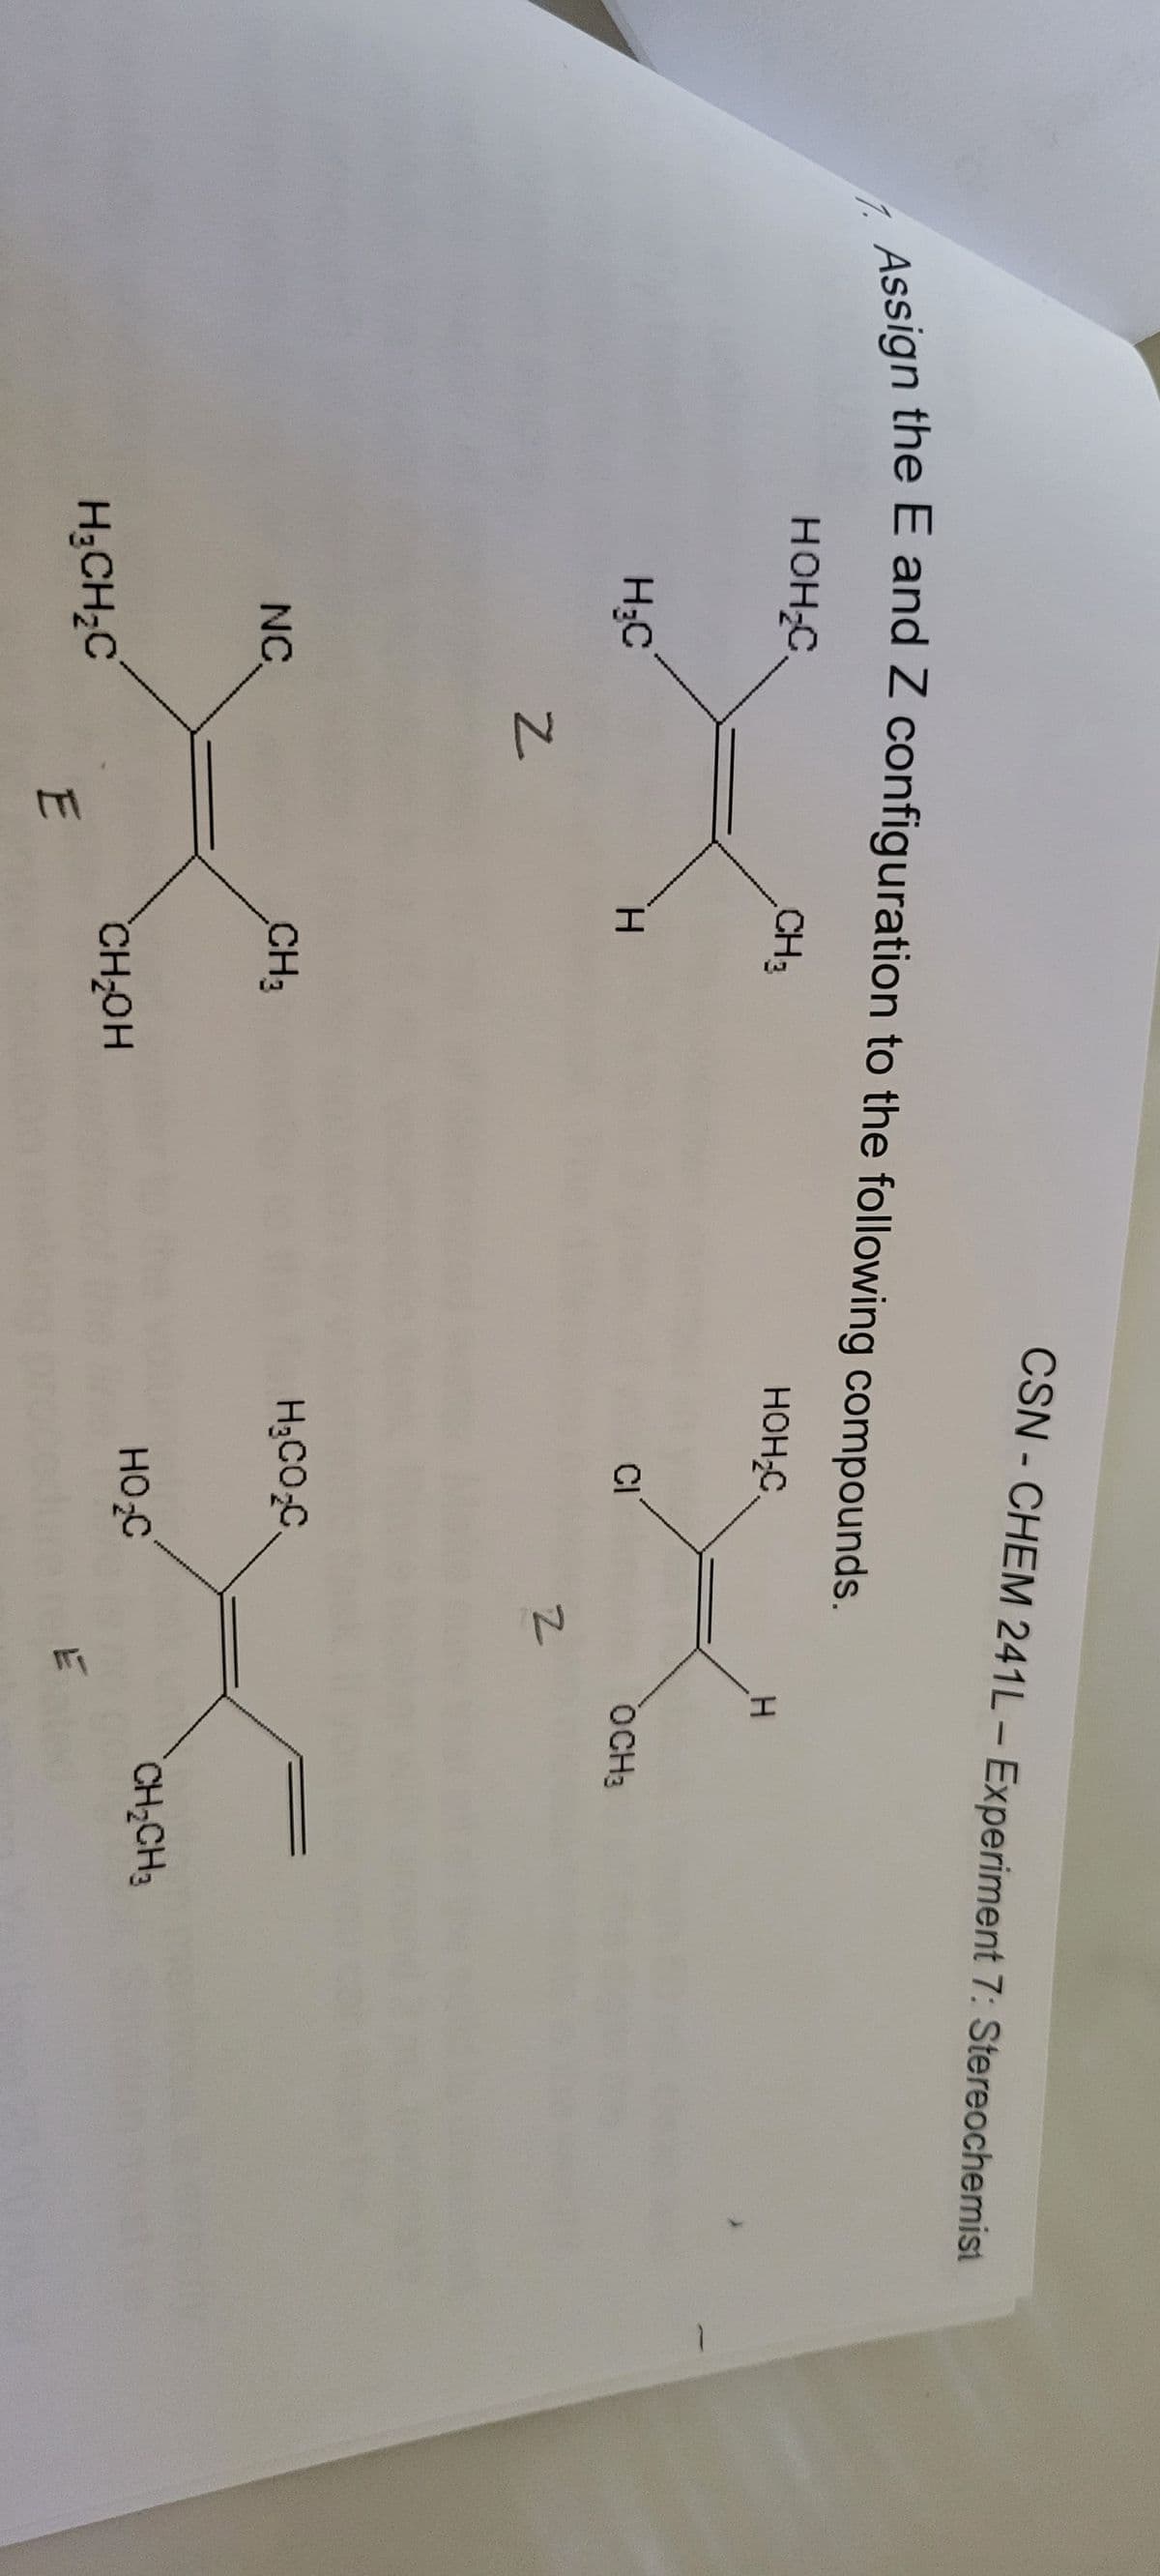 1.
Assign the E and Z configuration to the following compounds.
HOH-C
H₂C
NC.
H₂CH₂C
N
E
CH3
H
CH3
CSN-CHEM 241L-Experiment 7: Stereochemist
CH₂OH
HOH₂C.
CI
H₂CO₂C.
HO₂C
N
H
OCH3
CH₂CH3